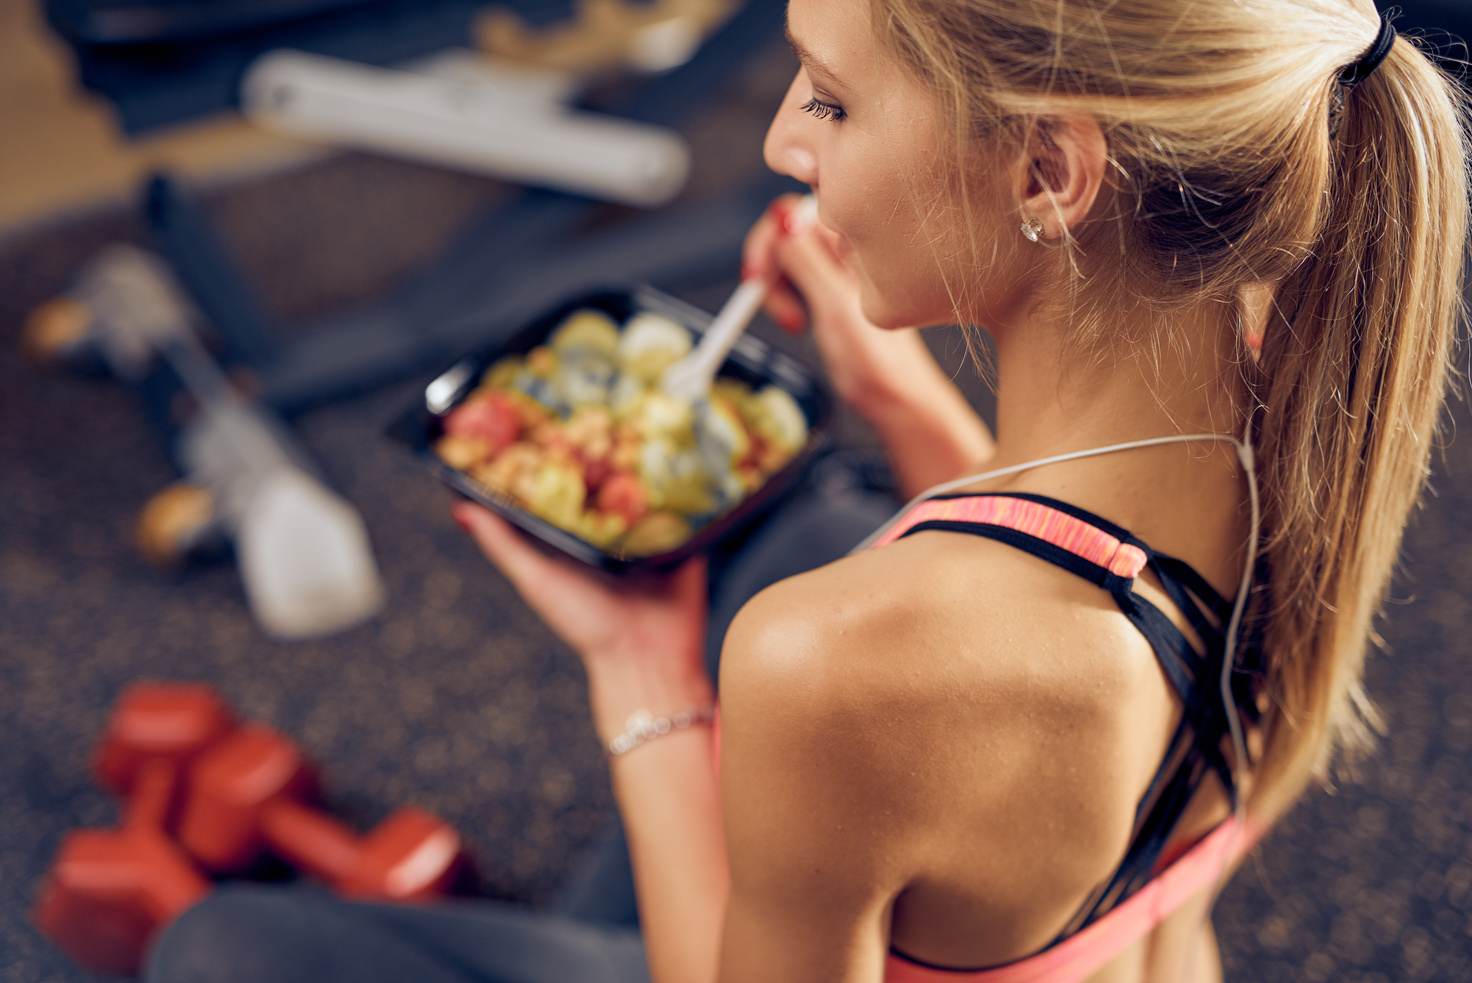 Top view of woman eating healthy food in a gym.